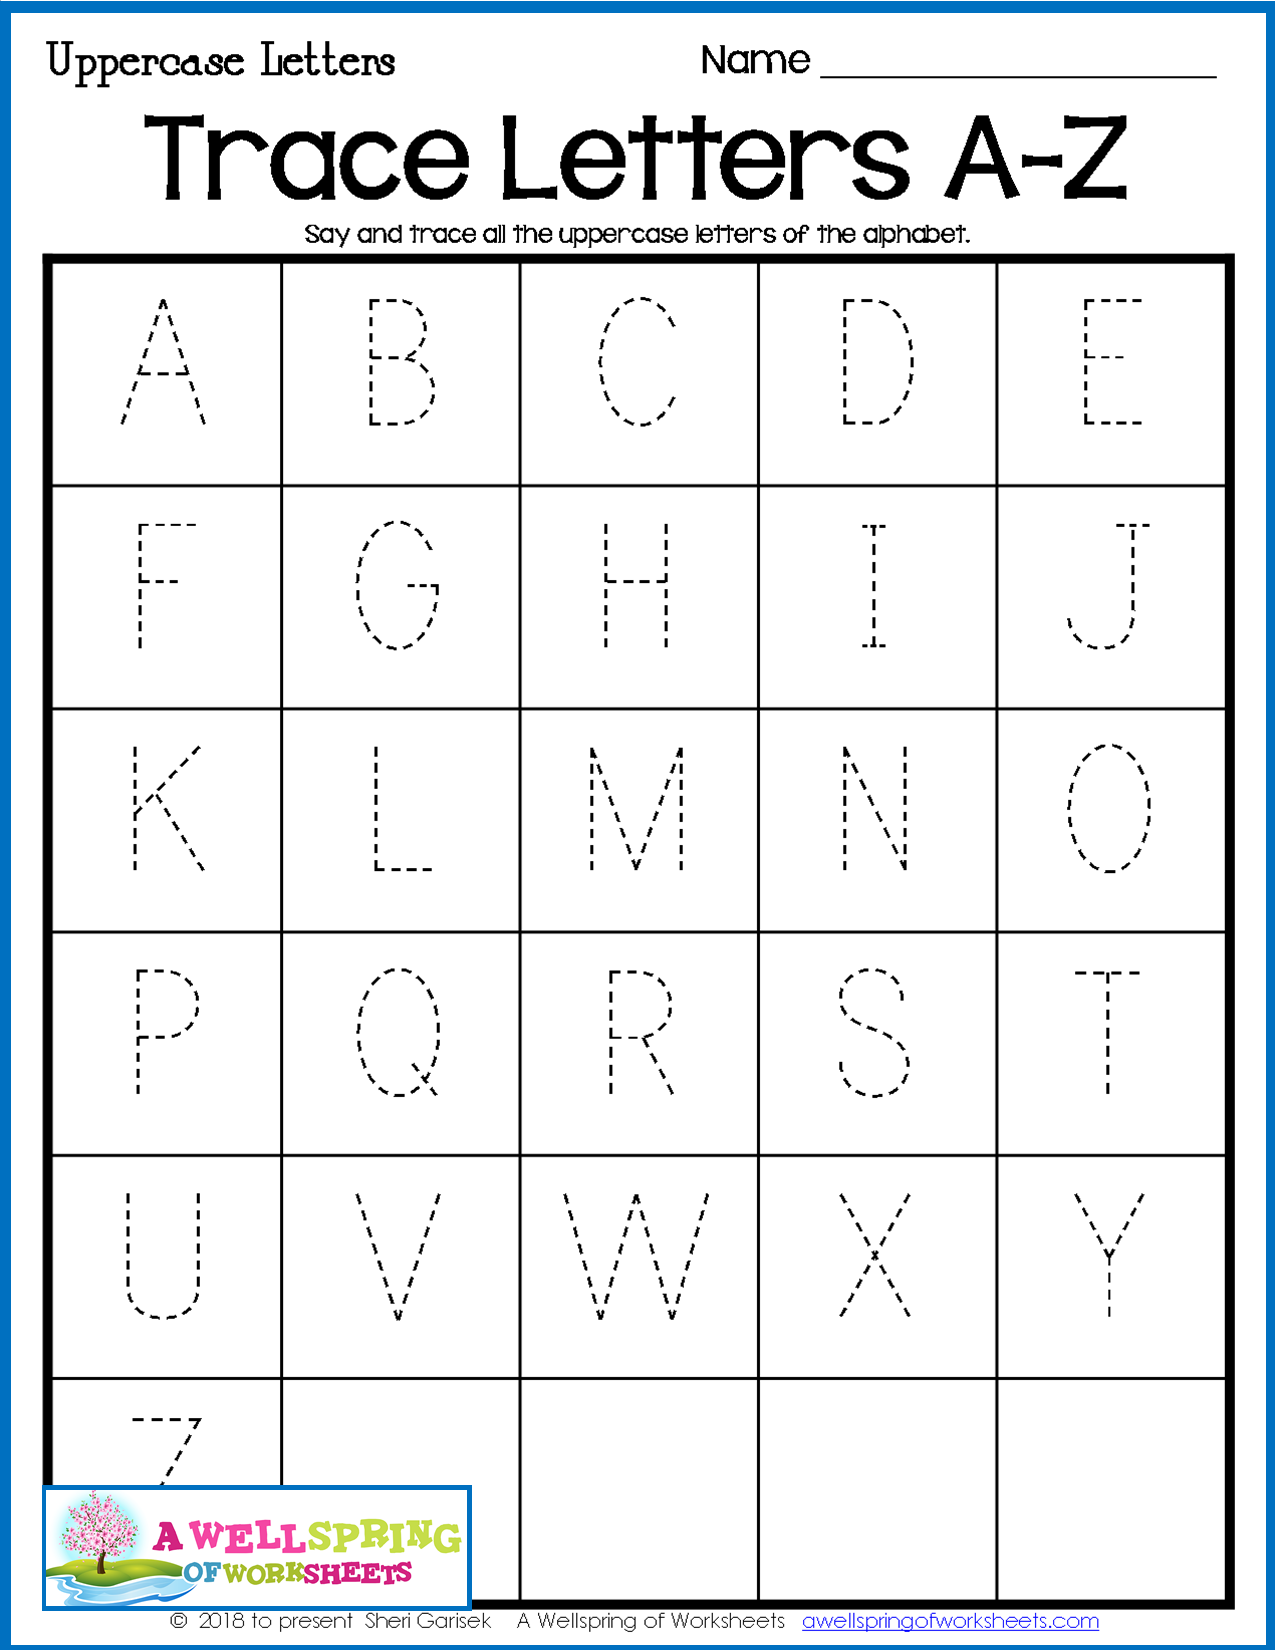 free-uppercase-and-lowercase-letter-tracing-worksheets-alphabetworksheetsfree